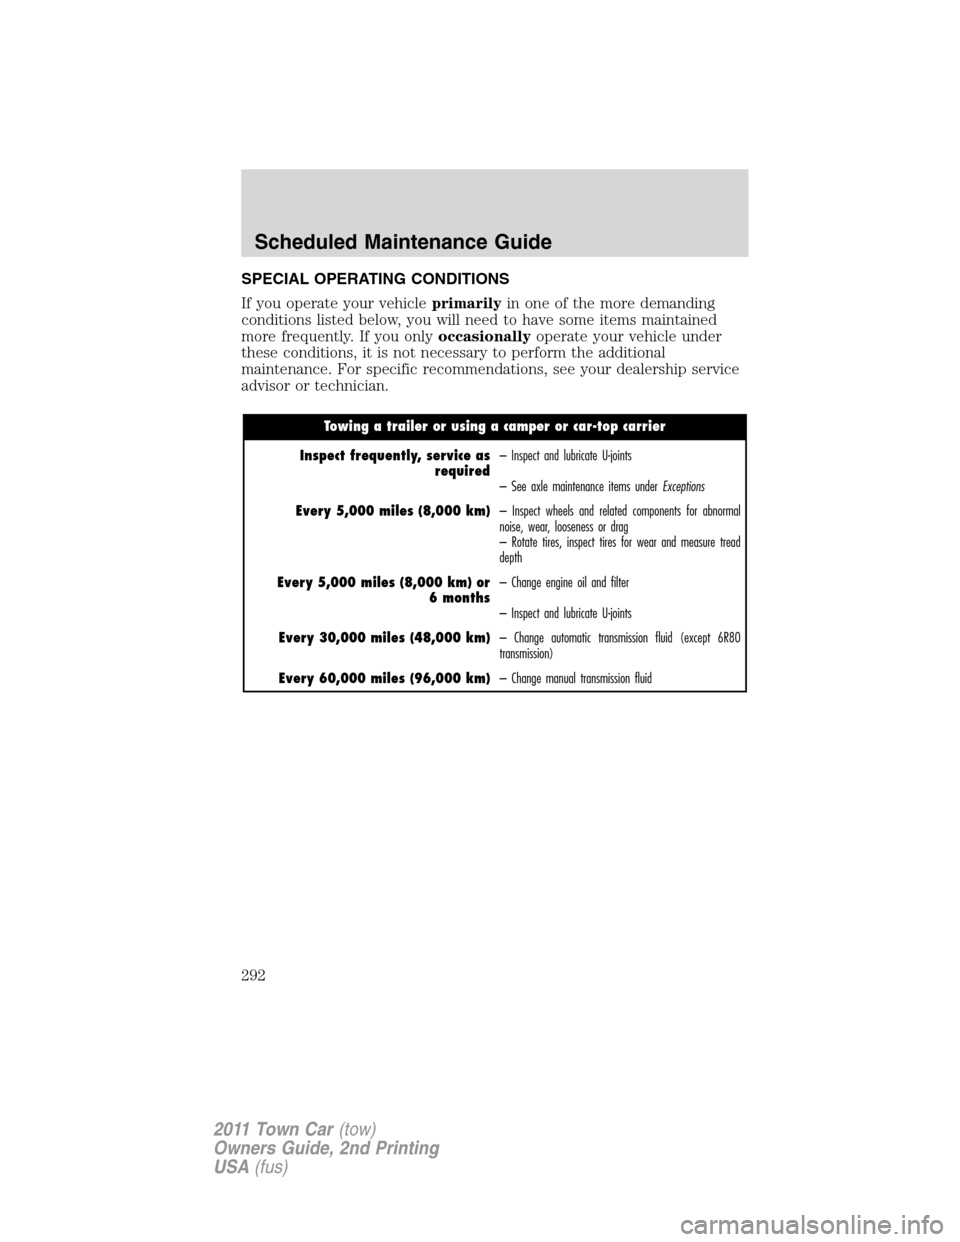 LINCOLN TOWN CAR 2011 Manual PDF SPECIAL OPERATING CONDITIONS
If you operate your vehicleprimarilyin one of the more demanding
conditions listed below, you will need to have some items maintained
more frequently. If you onlyoccasiona